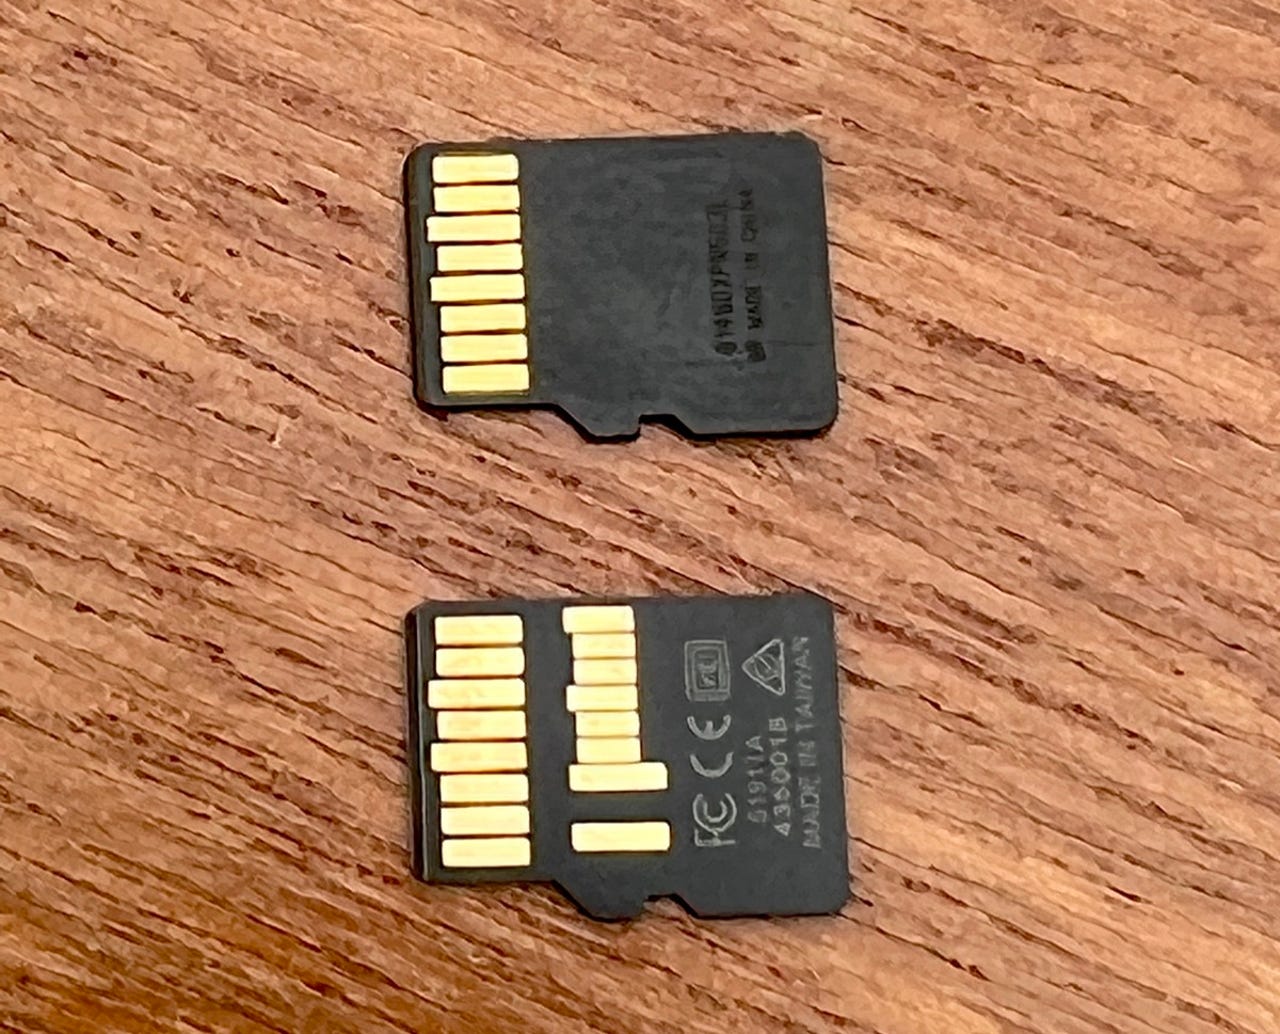 What Is a MicroSD Card? Here's What You Need to Know